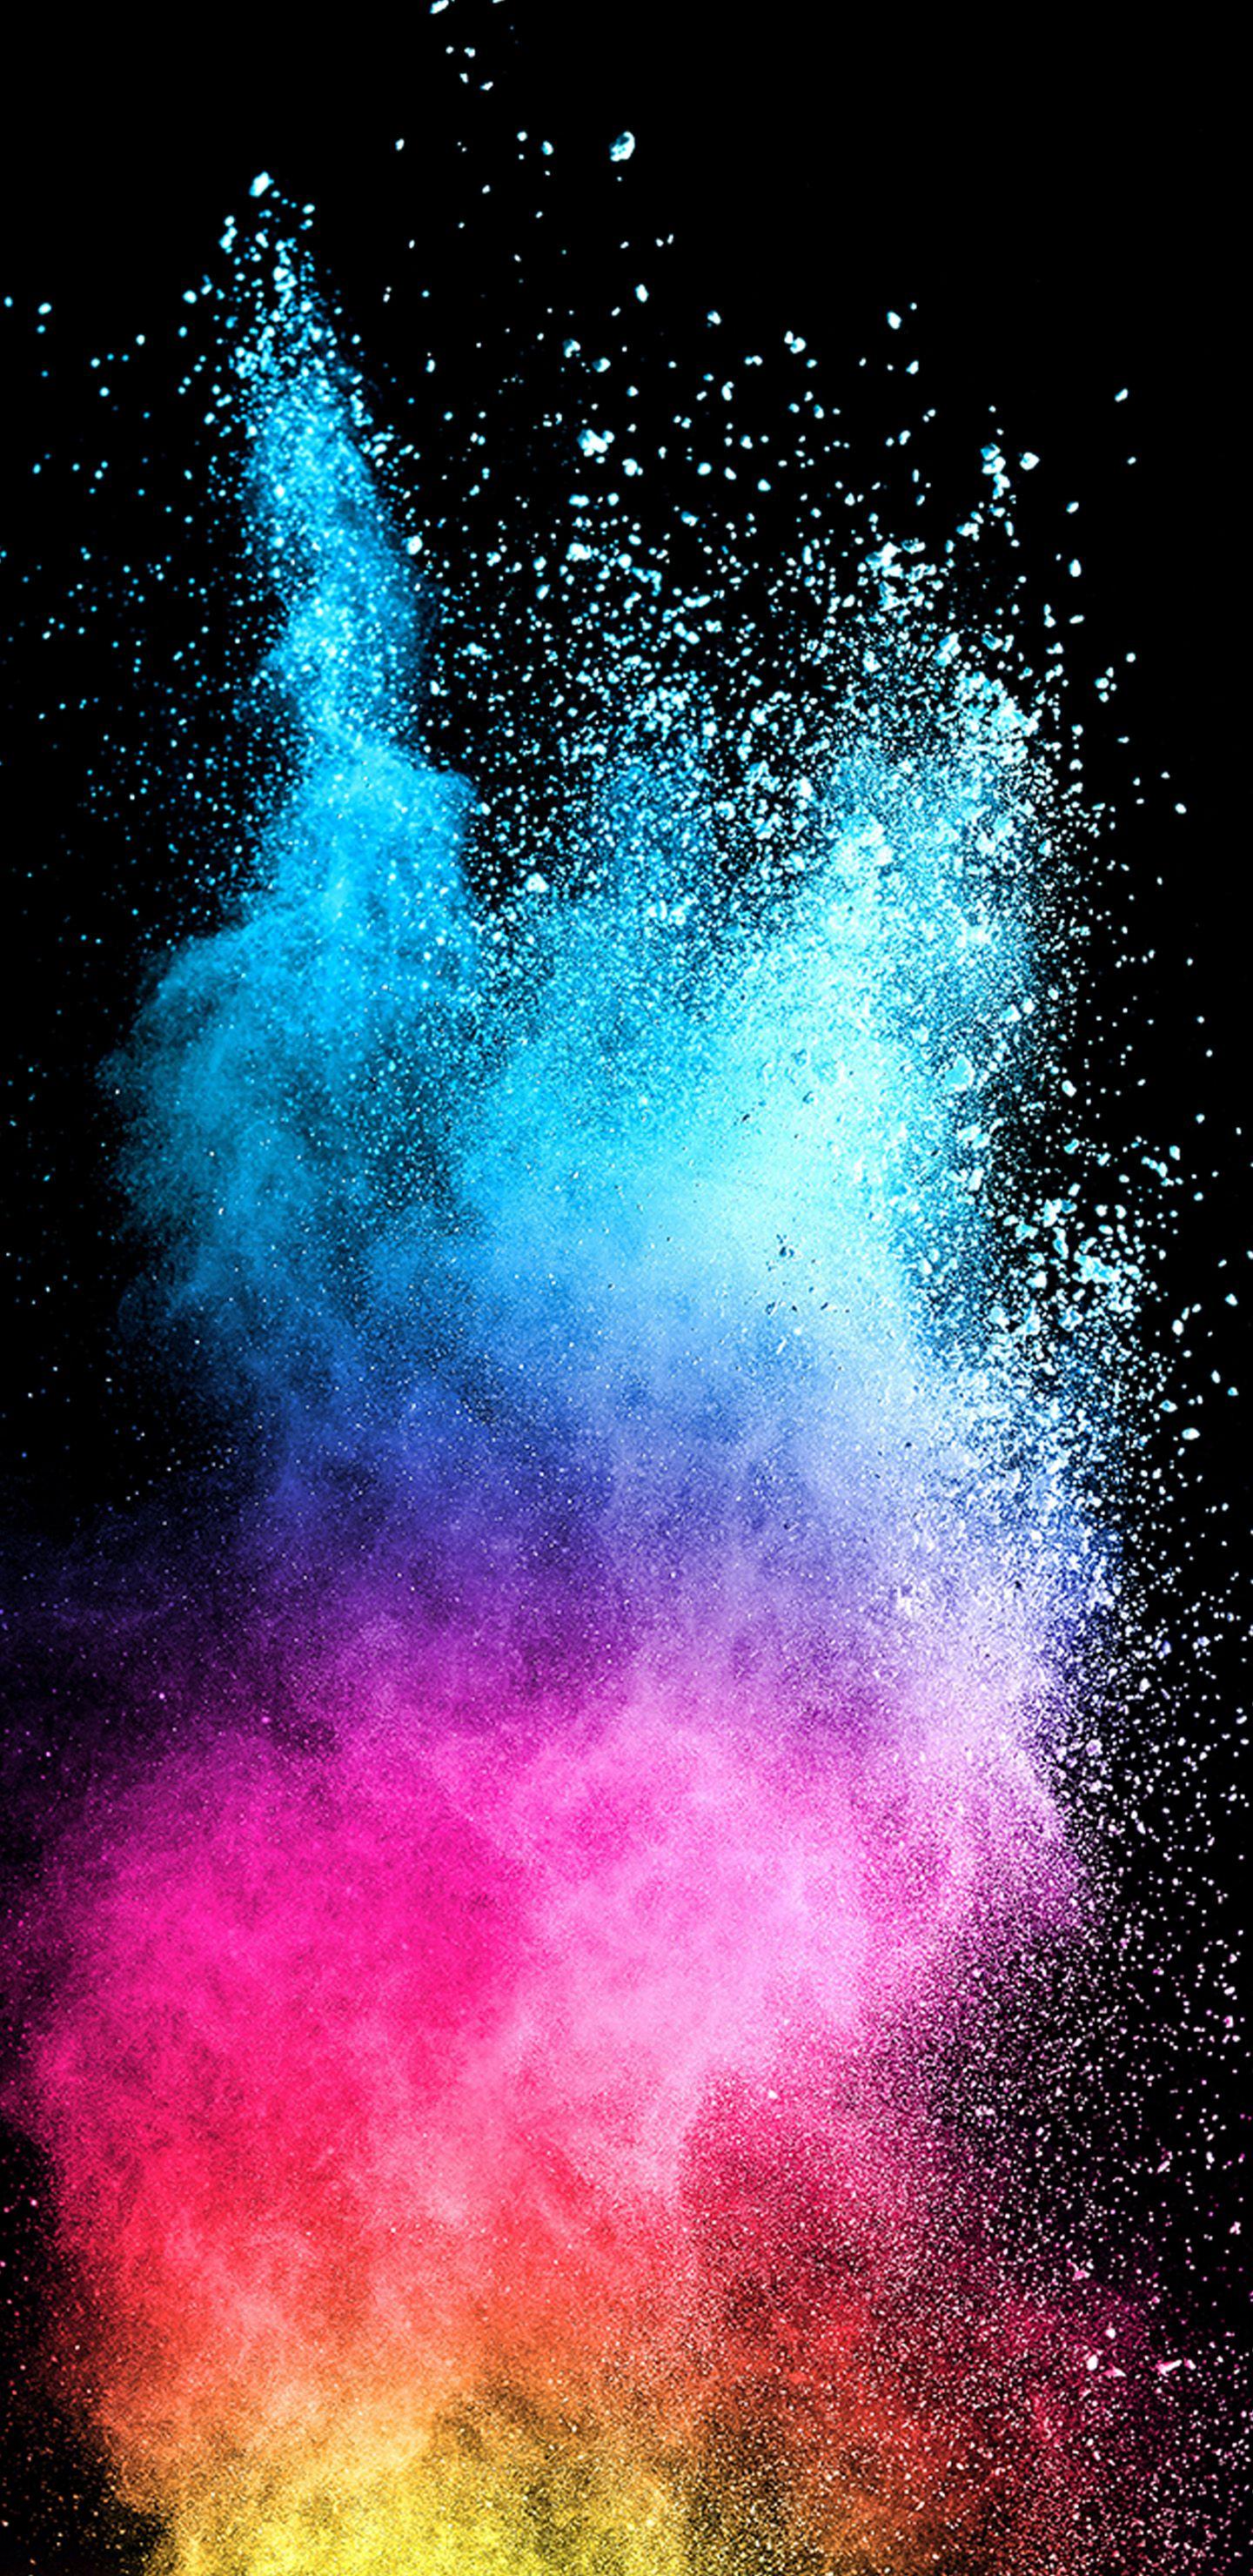 Abstract Colorful Powder with Dark Background for Samsung Galaxy S9 Series Wallpaper Wallpaper. Wallpaper Download. High Resolution Wallpaper. Galaxy wallpaper iphone, Galaxy wallpaper, Samsung galaxy wallpaper